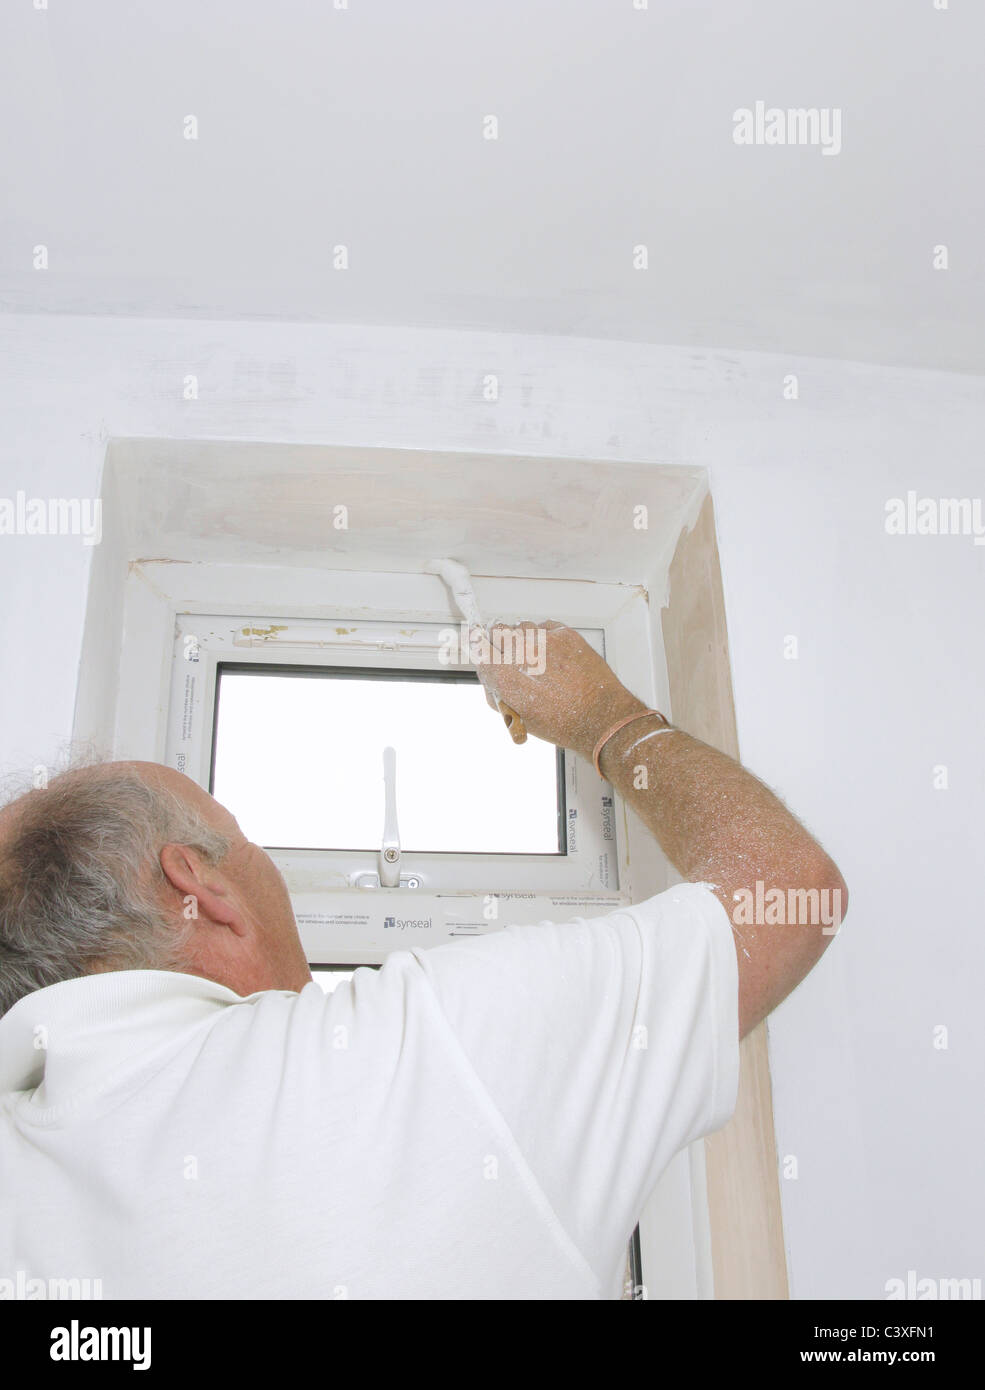 Newly Plastered Wall Stock Photos Newly Plastered Wall Stock